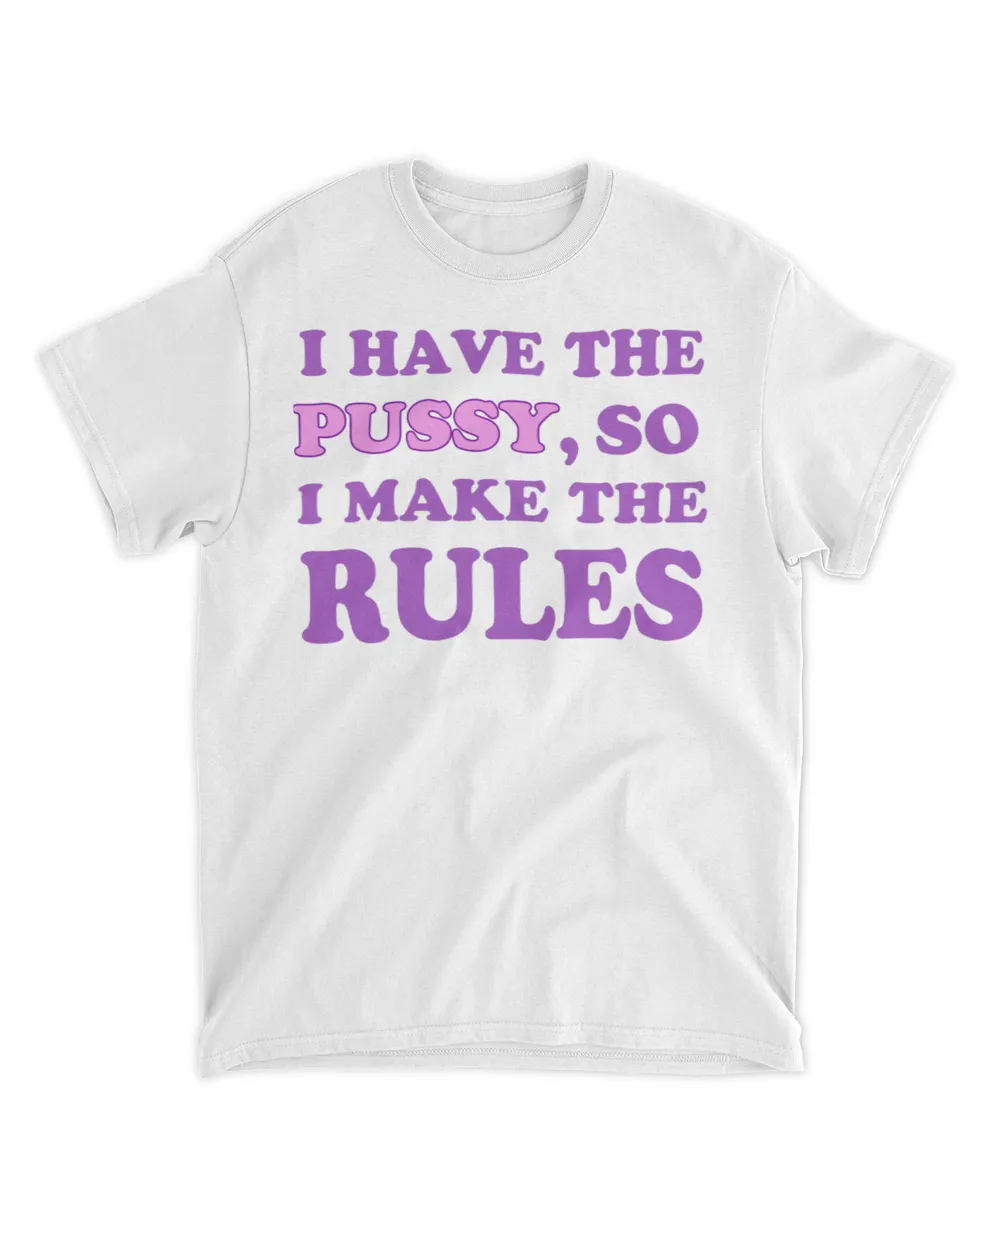  I have the pussy so I make the rules shirt